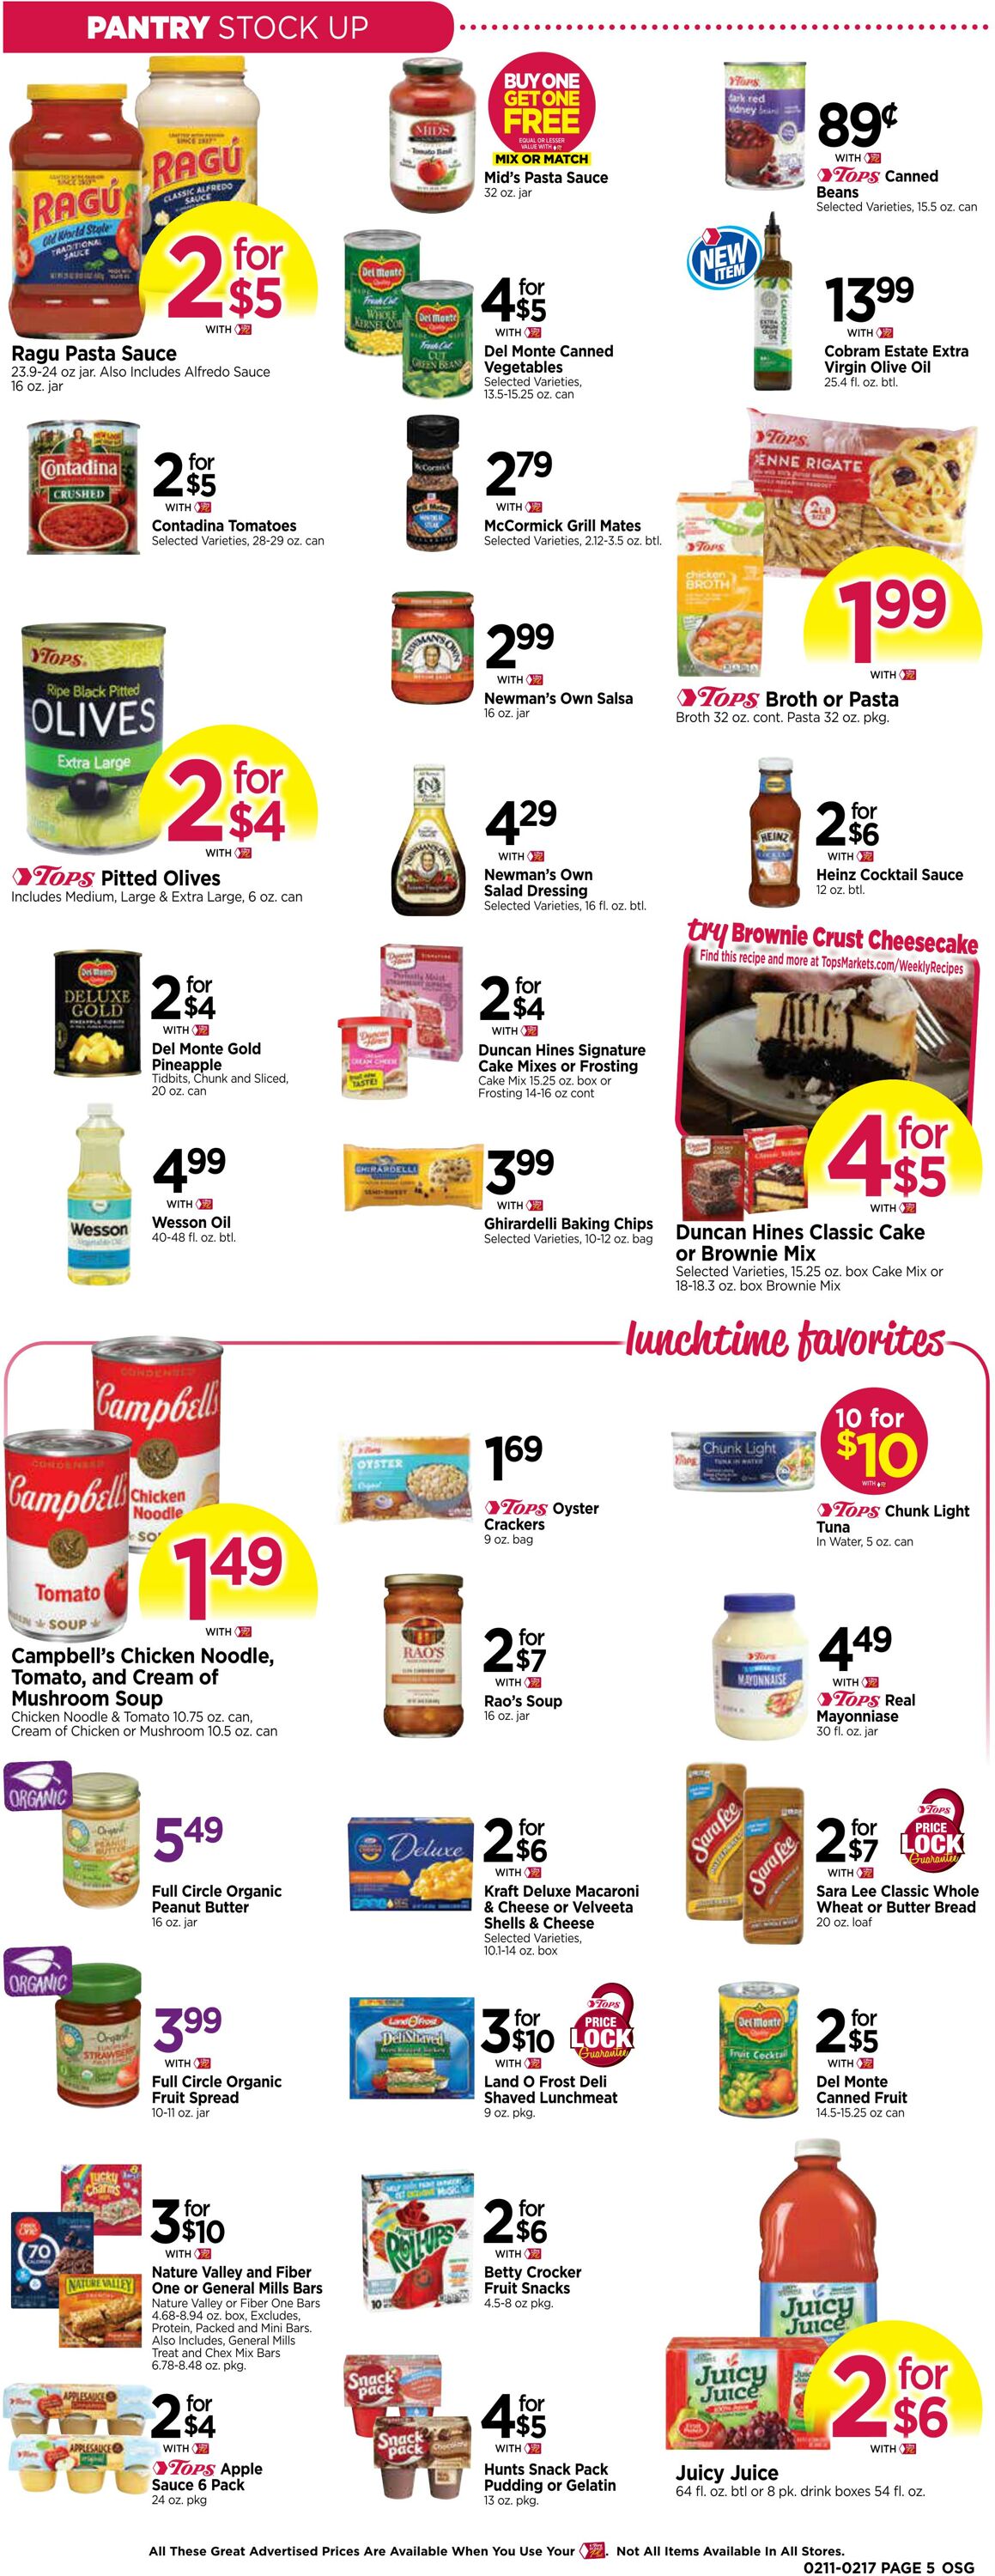 Weekly ad Tops Friendly Markets 02/11/2024 - 02/17/2024